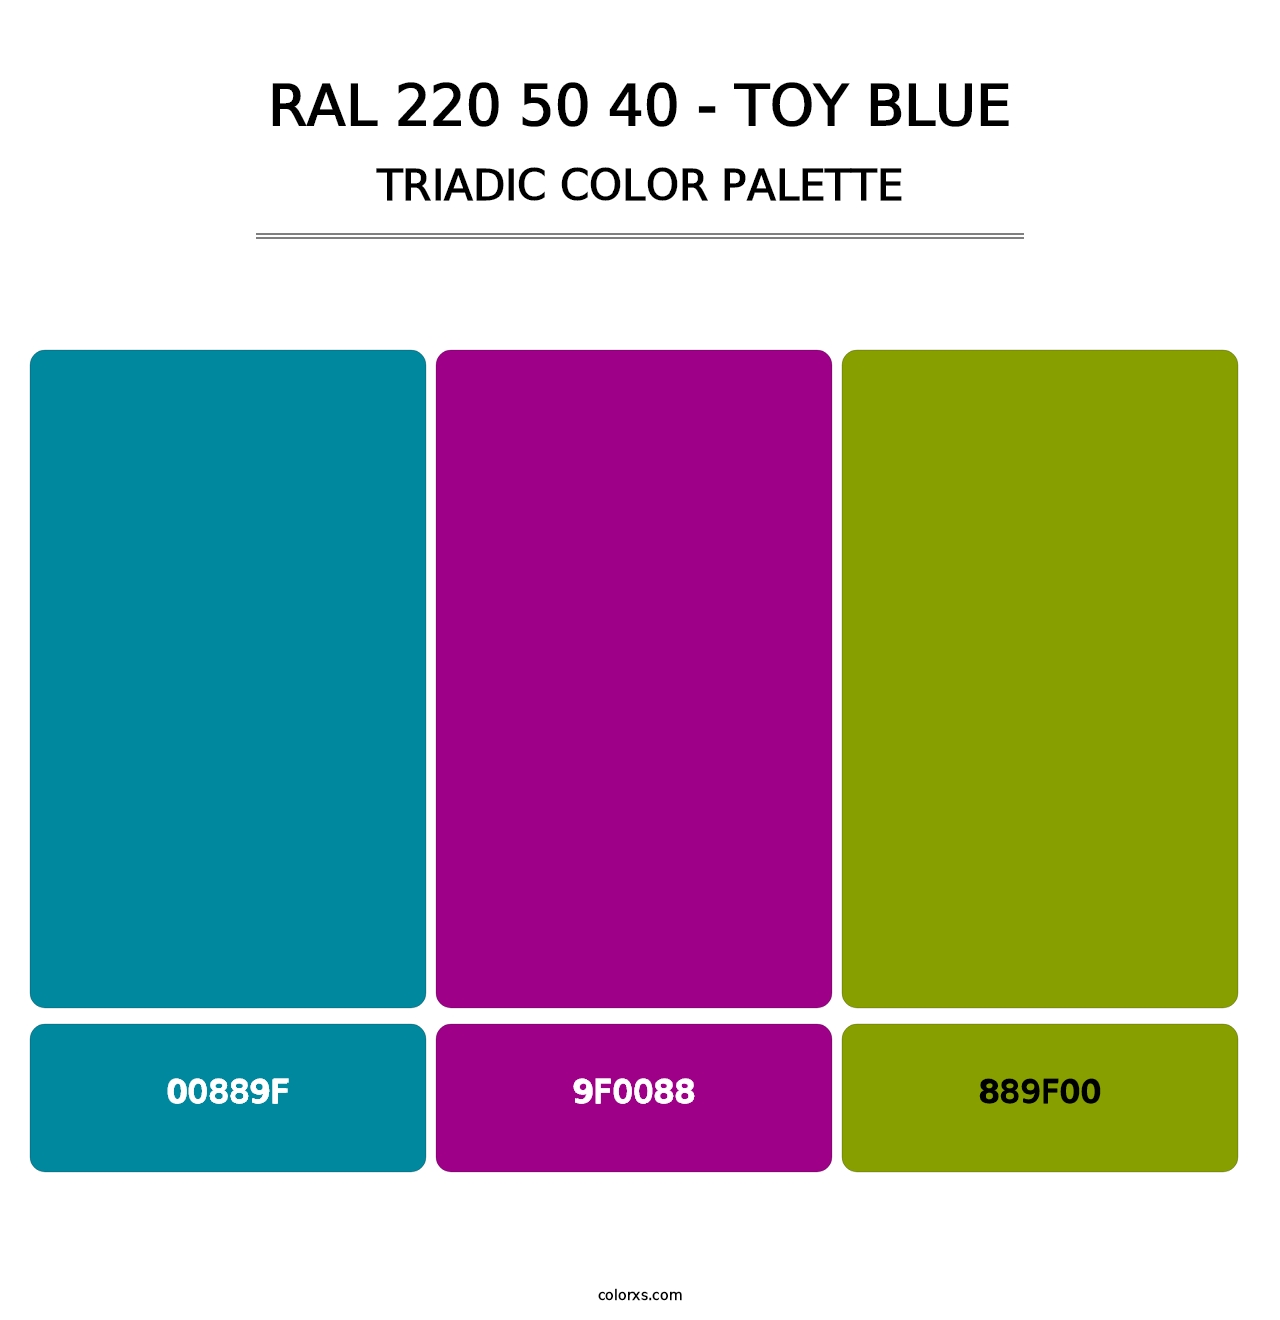 RAL 220 50 40 - Toy Blue - Triadic Color Palette